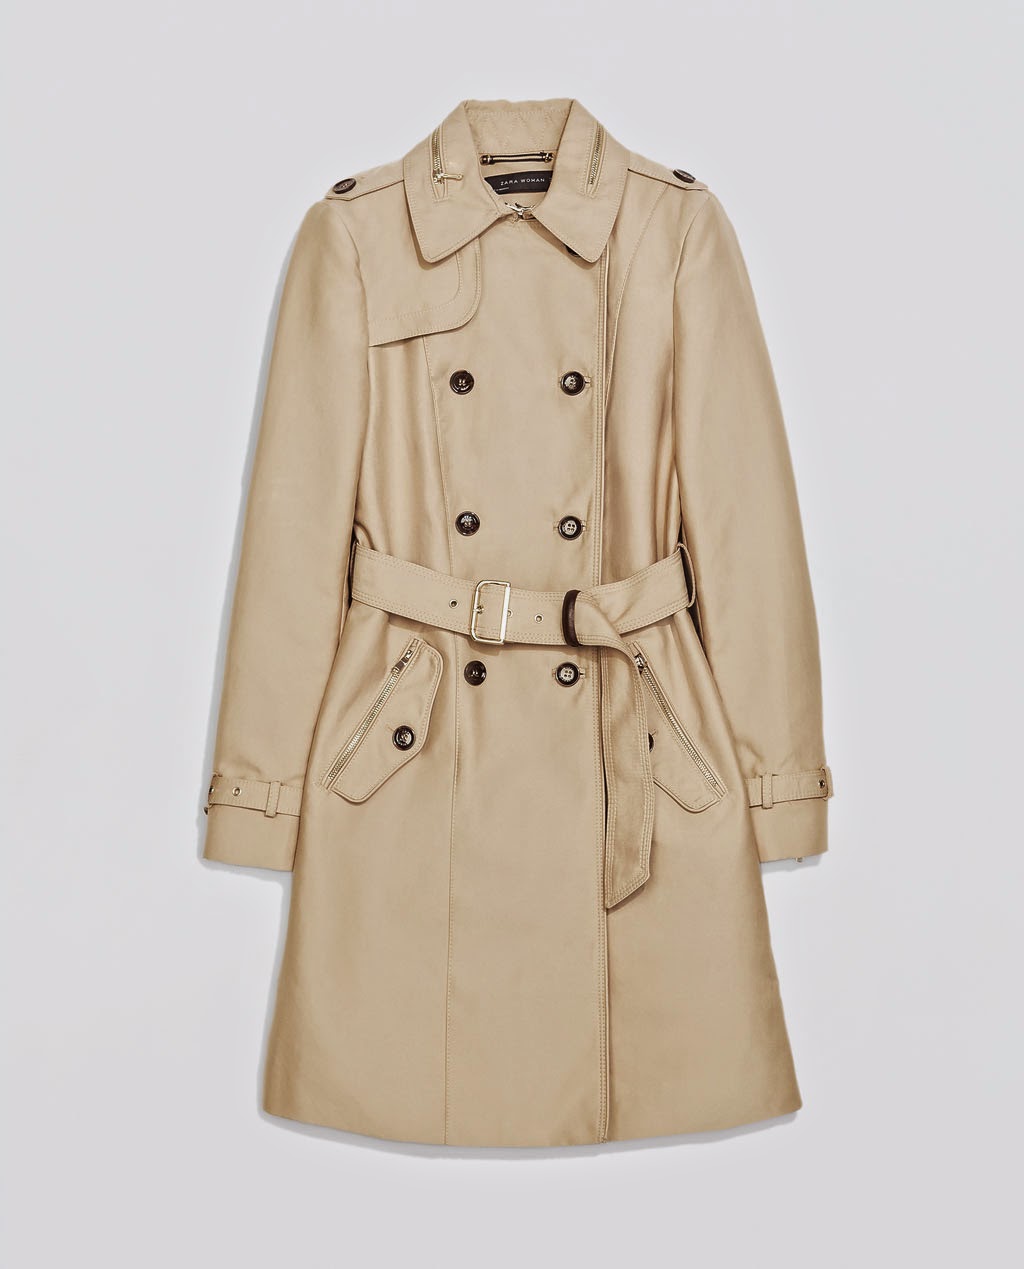 http://www.zara.com/us/en/woman/outerwear/trench-coats/double-breasted-trench-coat-c499003p1983522.html